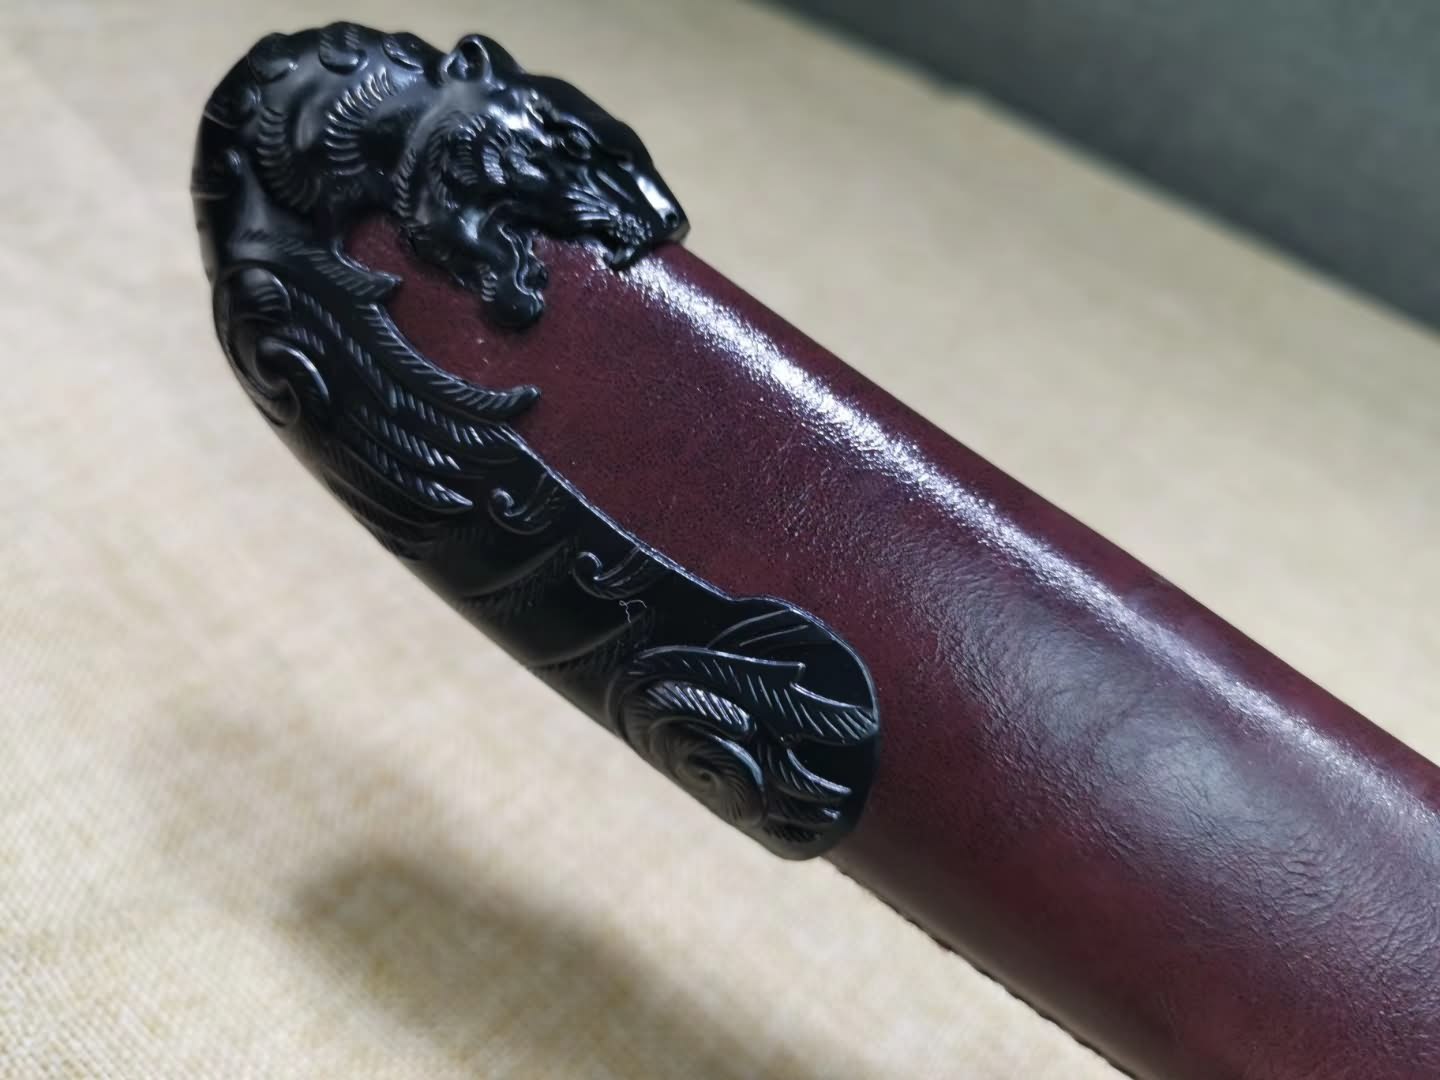 Dragon Tiger Broadsword(High carbon steel blade,Leather scabbard)Sharp - Chinese sword shop